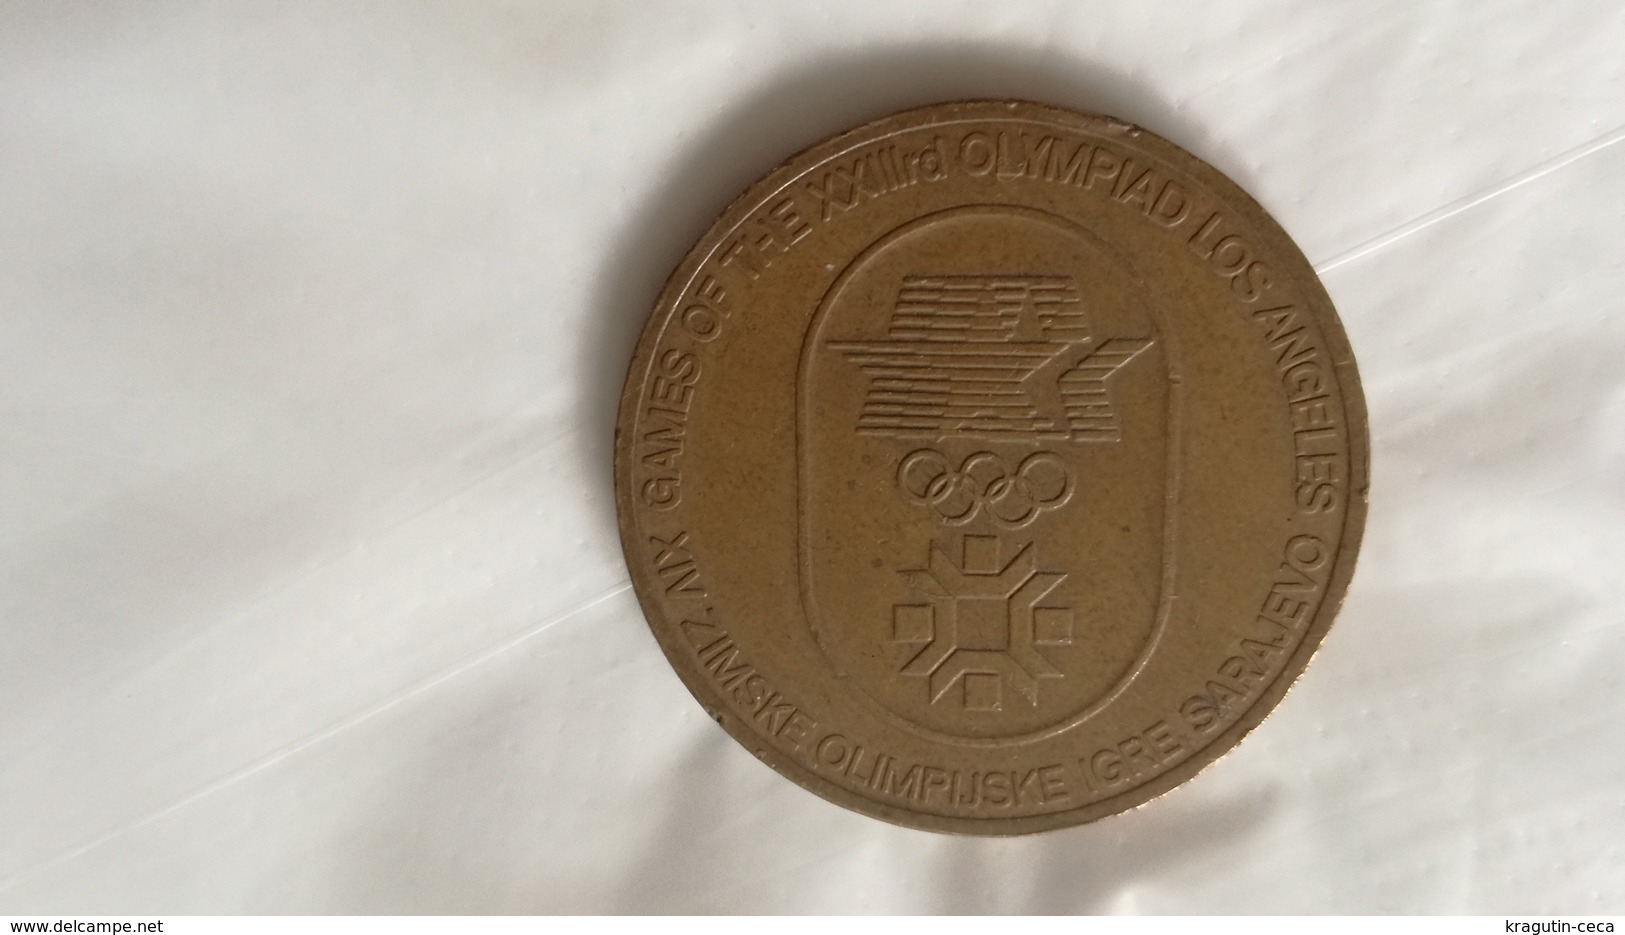 1984 OLYMPIC GAMES Coin XXIII Olympiad LOS ANGELES SARAJEVO Coin Medal Münze Medaille Pièce De Monnaie OLYMPIADE - Apparel, Souvenirs & Other